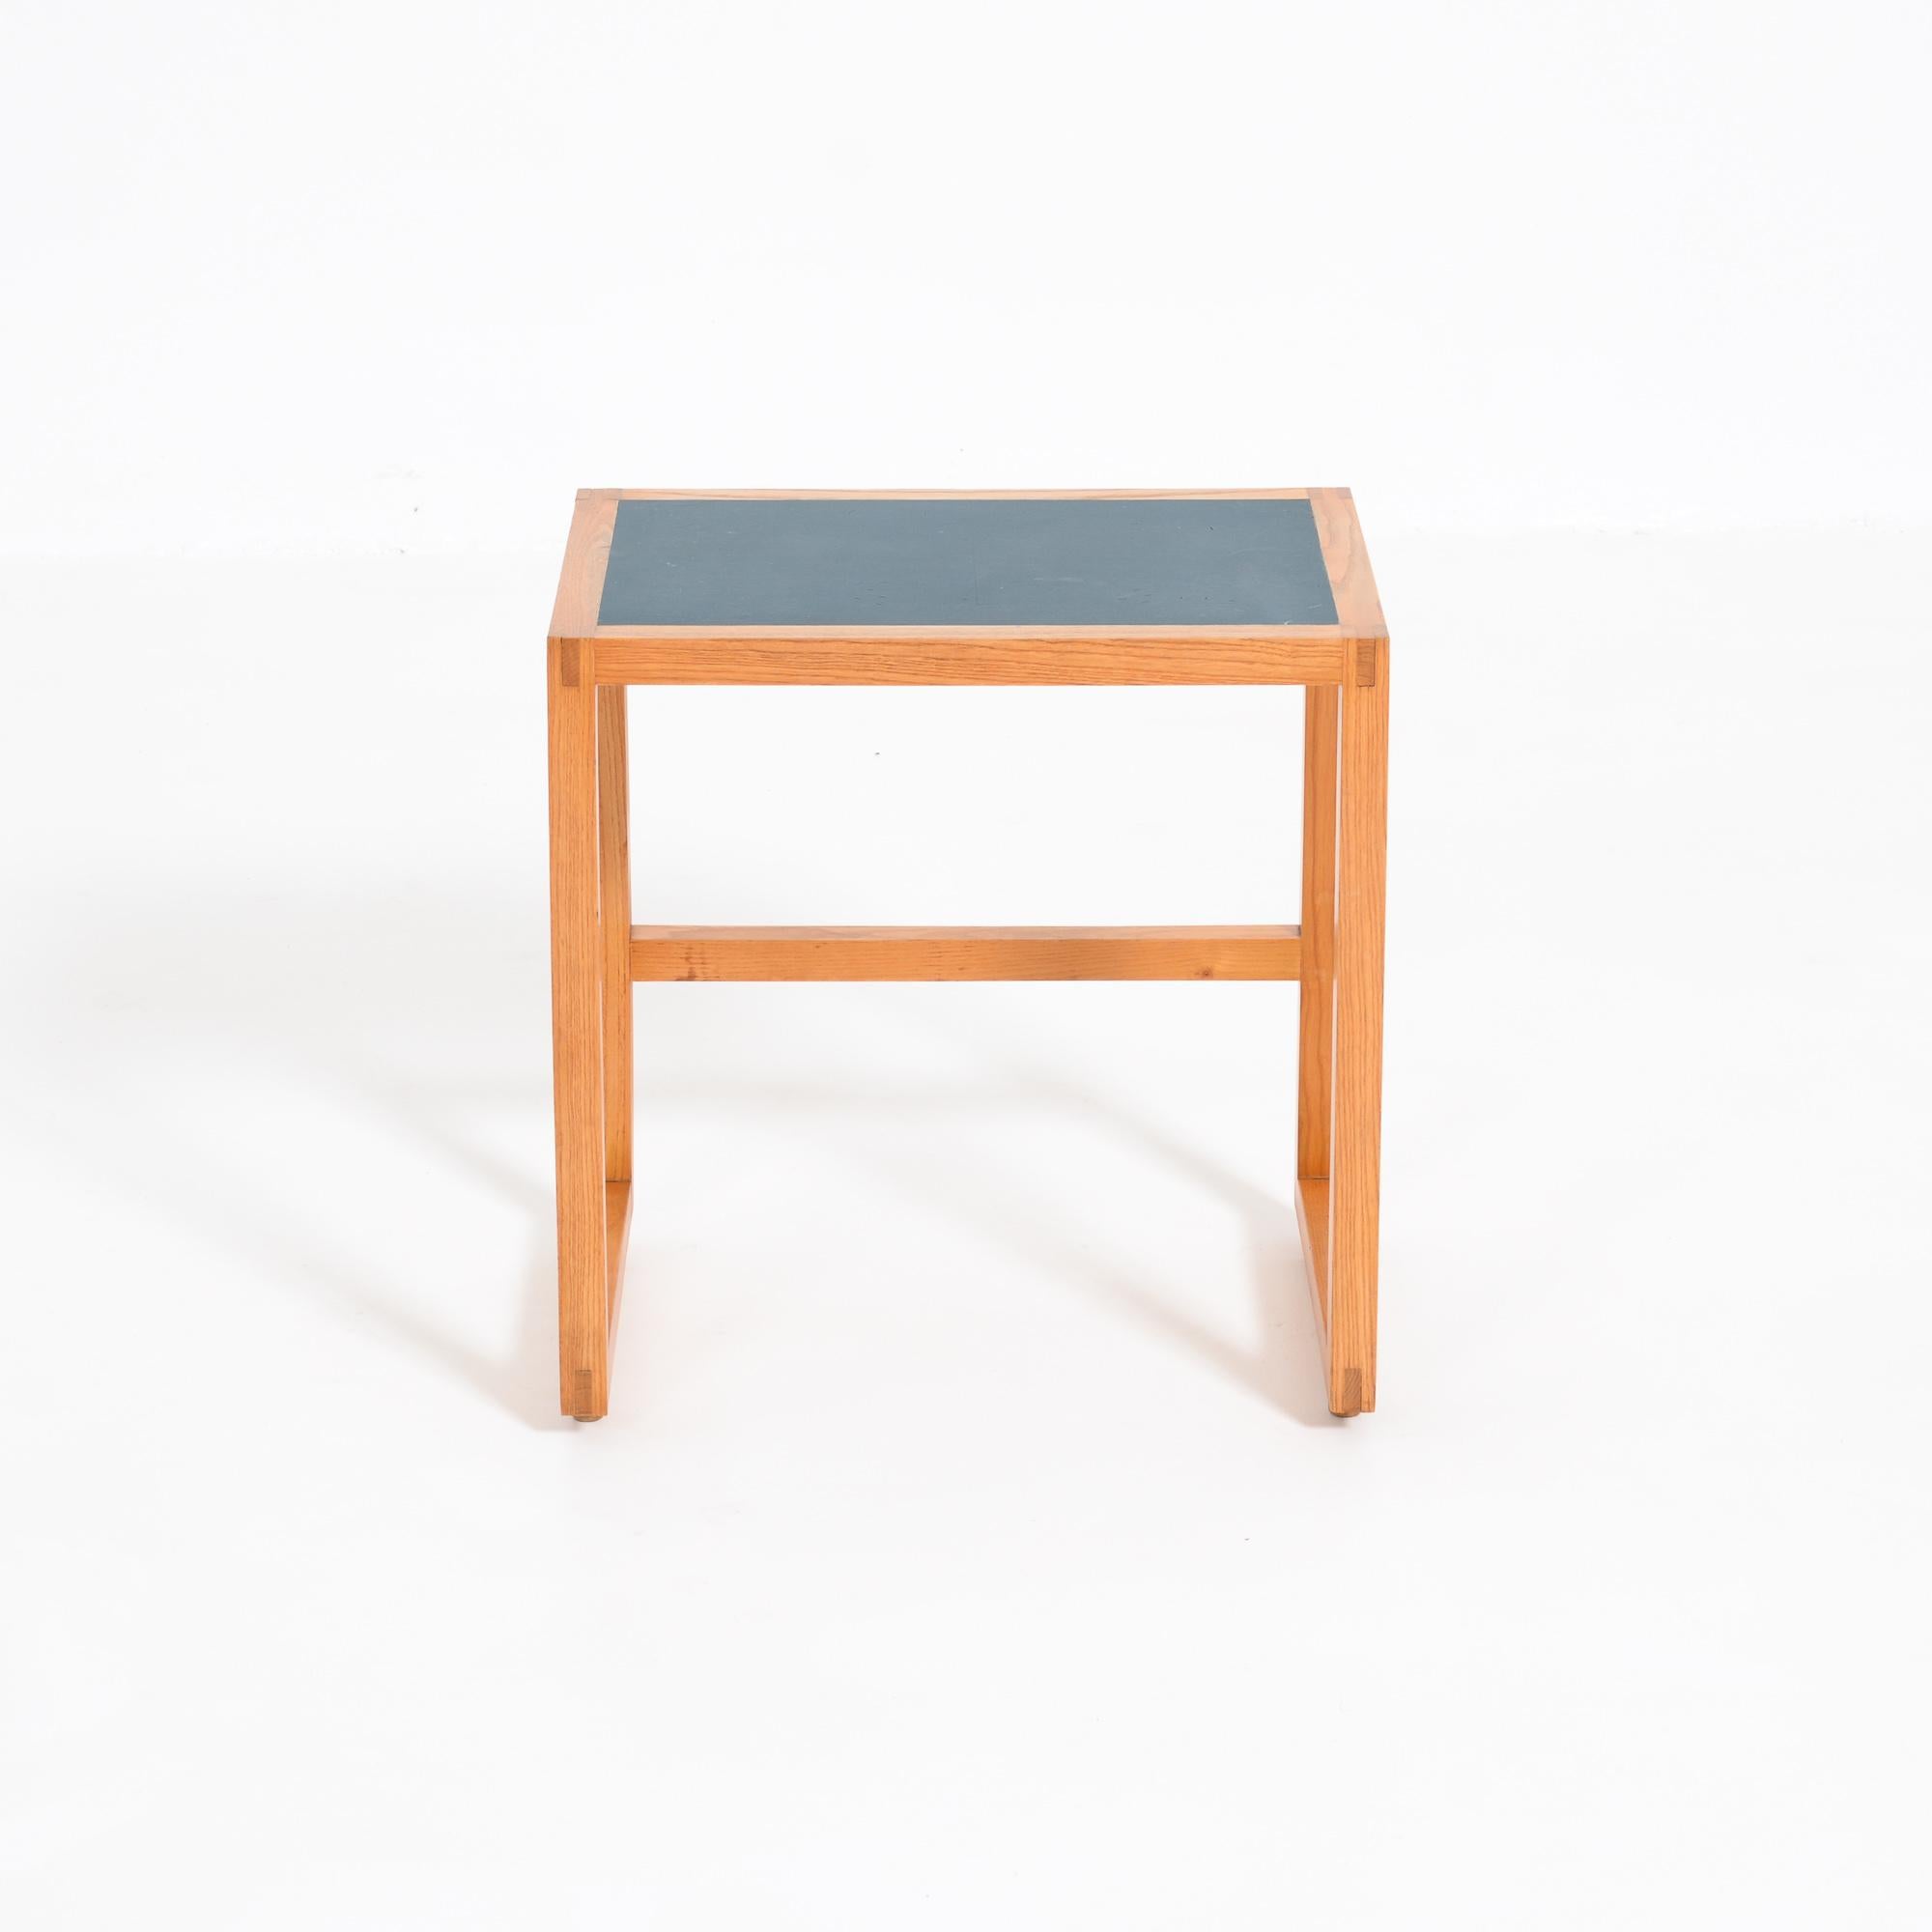 This side table or night stand was designed by Pieter De Bruyne in 1957 and manufactured in 1958.
Characteristic of De Bruyne’s work is the pure design with an eye for detail.
This side table is made of ash wood with a blue linoleum top.
The side